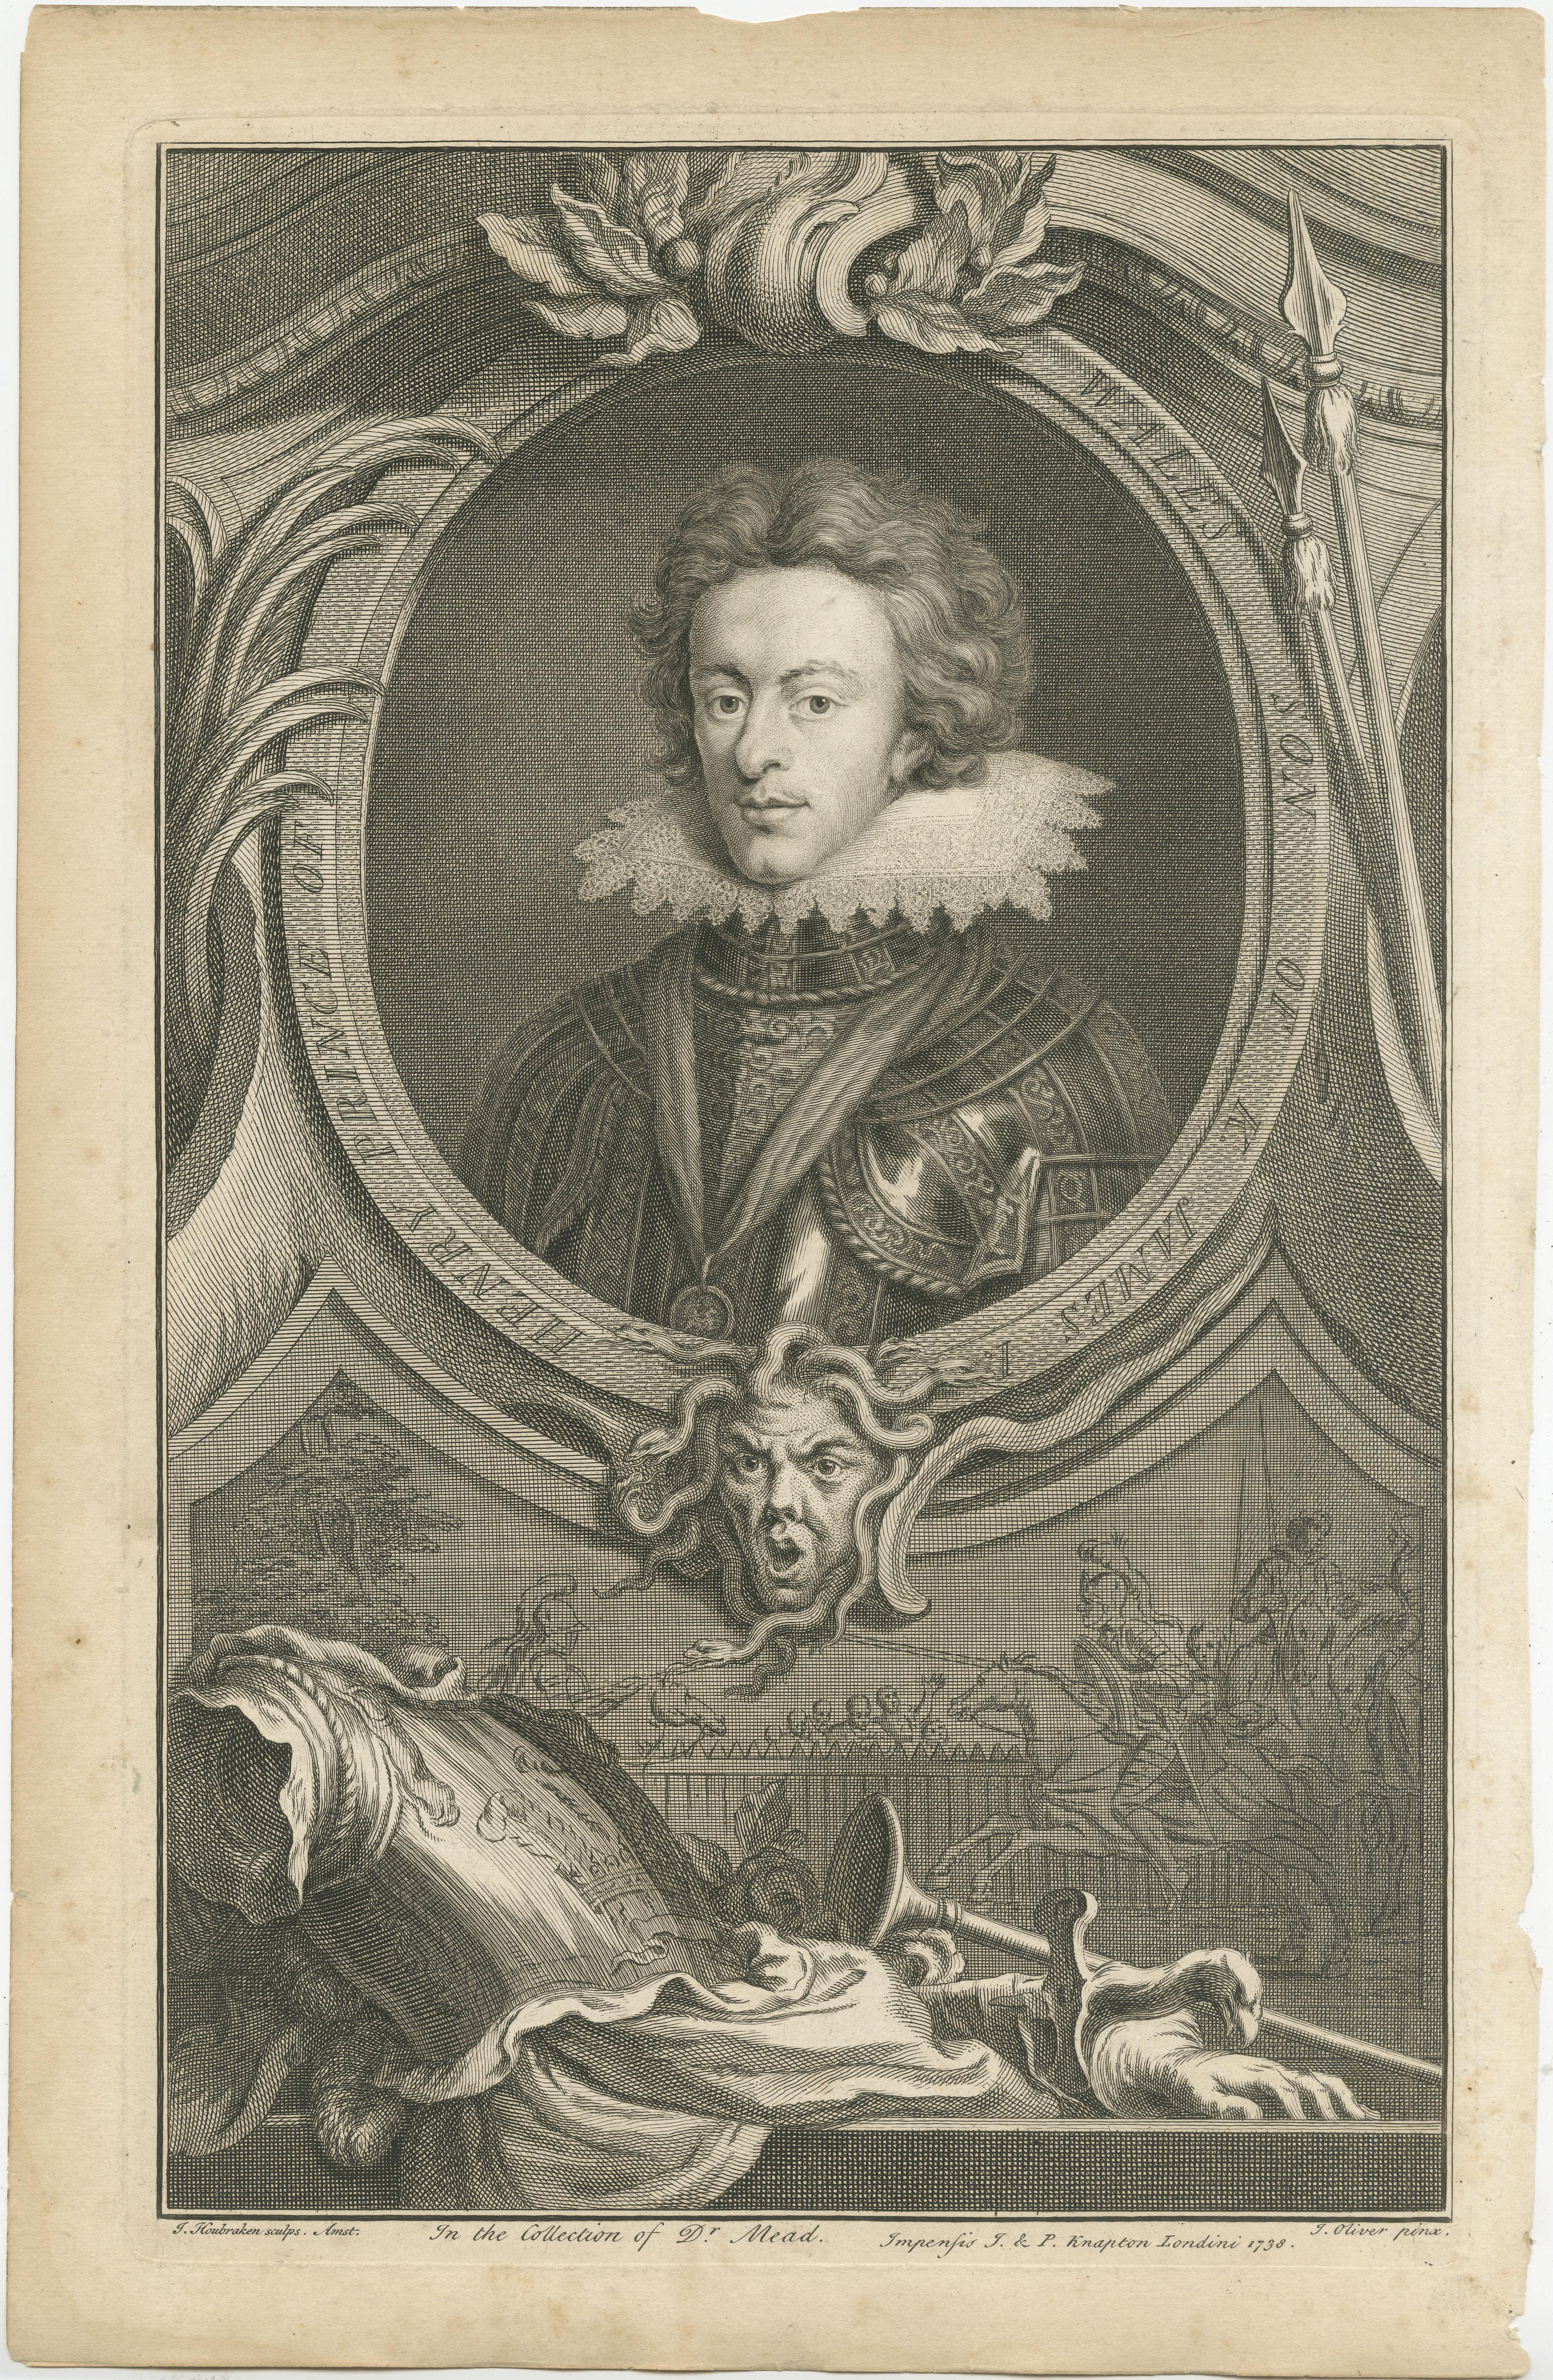 Antique portrait titled 'Henry Prince of Wales Son of K. James I'. Henry Frederick, Prince of Wales KG (19 February 1594 – 6 November 1612), was the eldest son and heir apparent of James VI and I, King of England and Scotland; and his wife Anne of